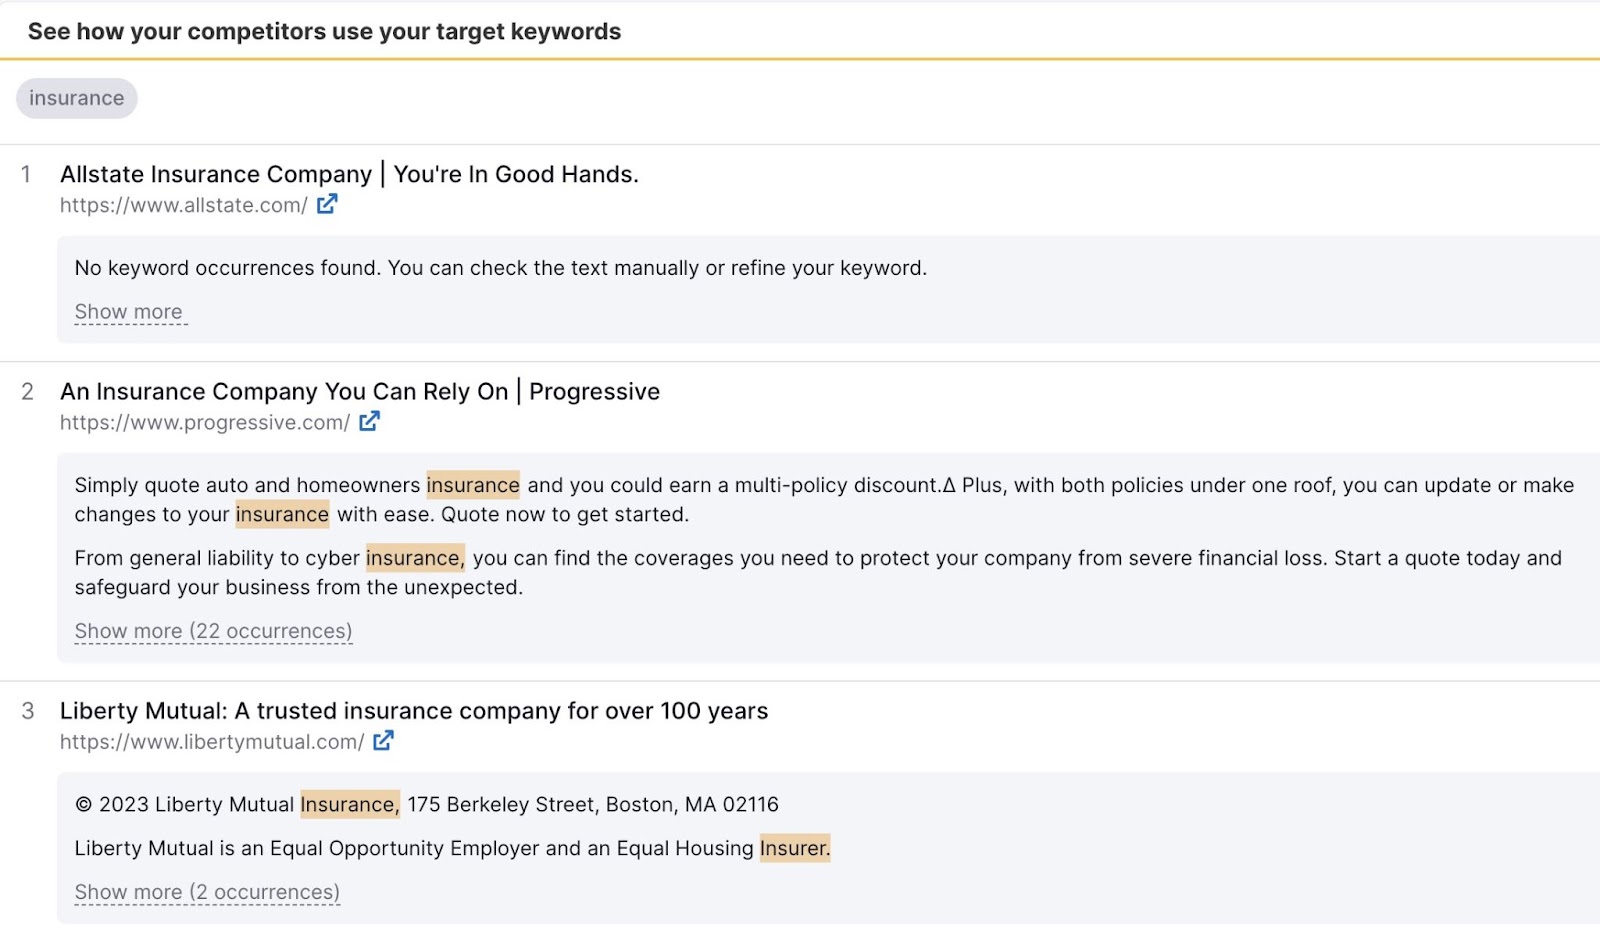 "See how your competitors use your target keywords" section of SEO Content Template